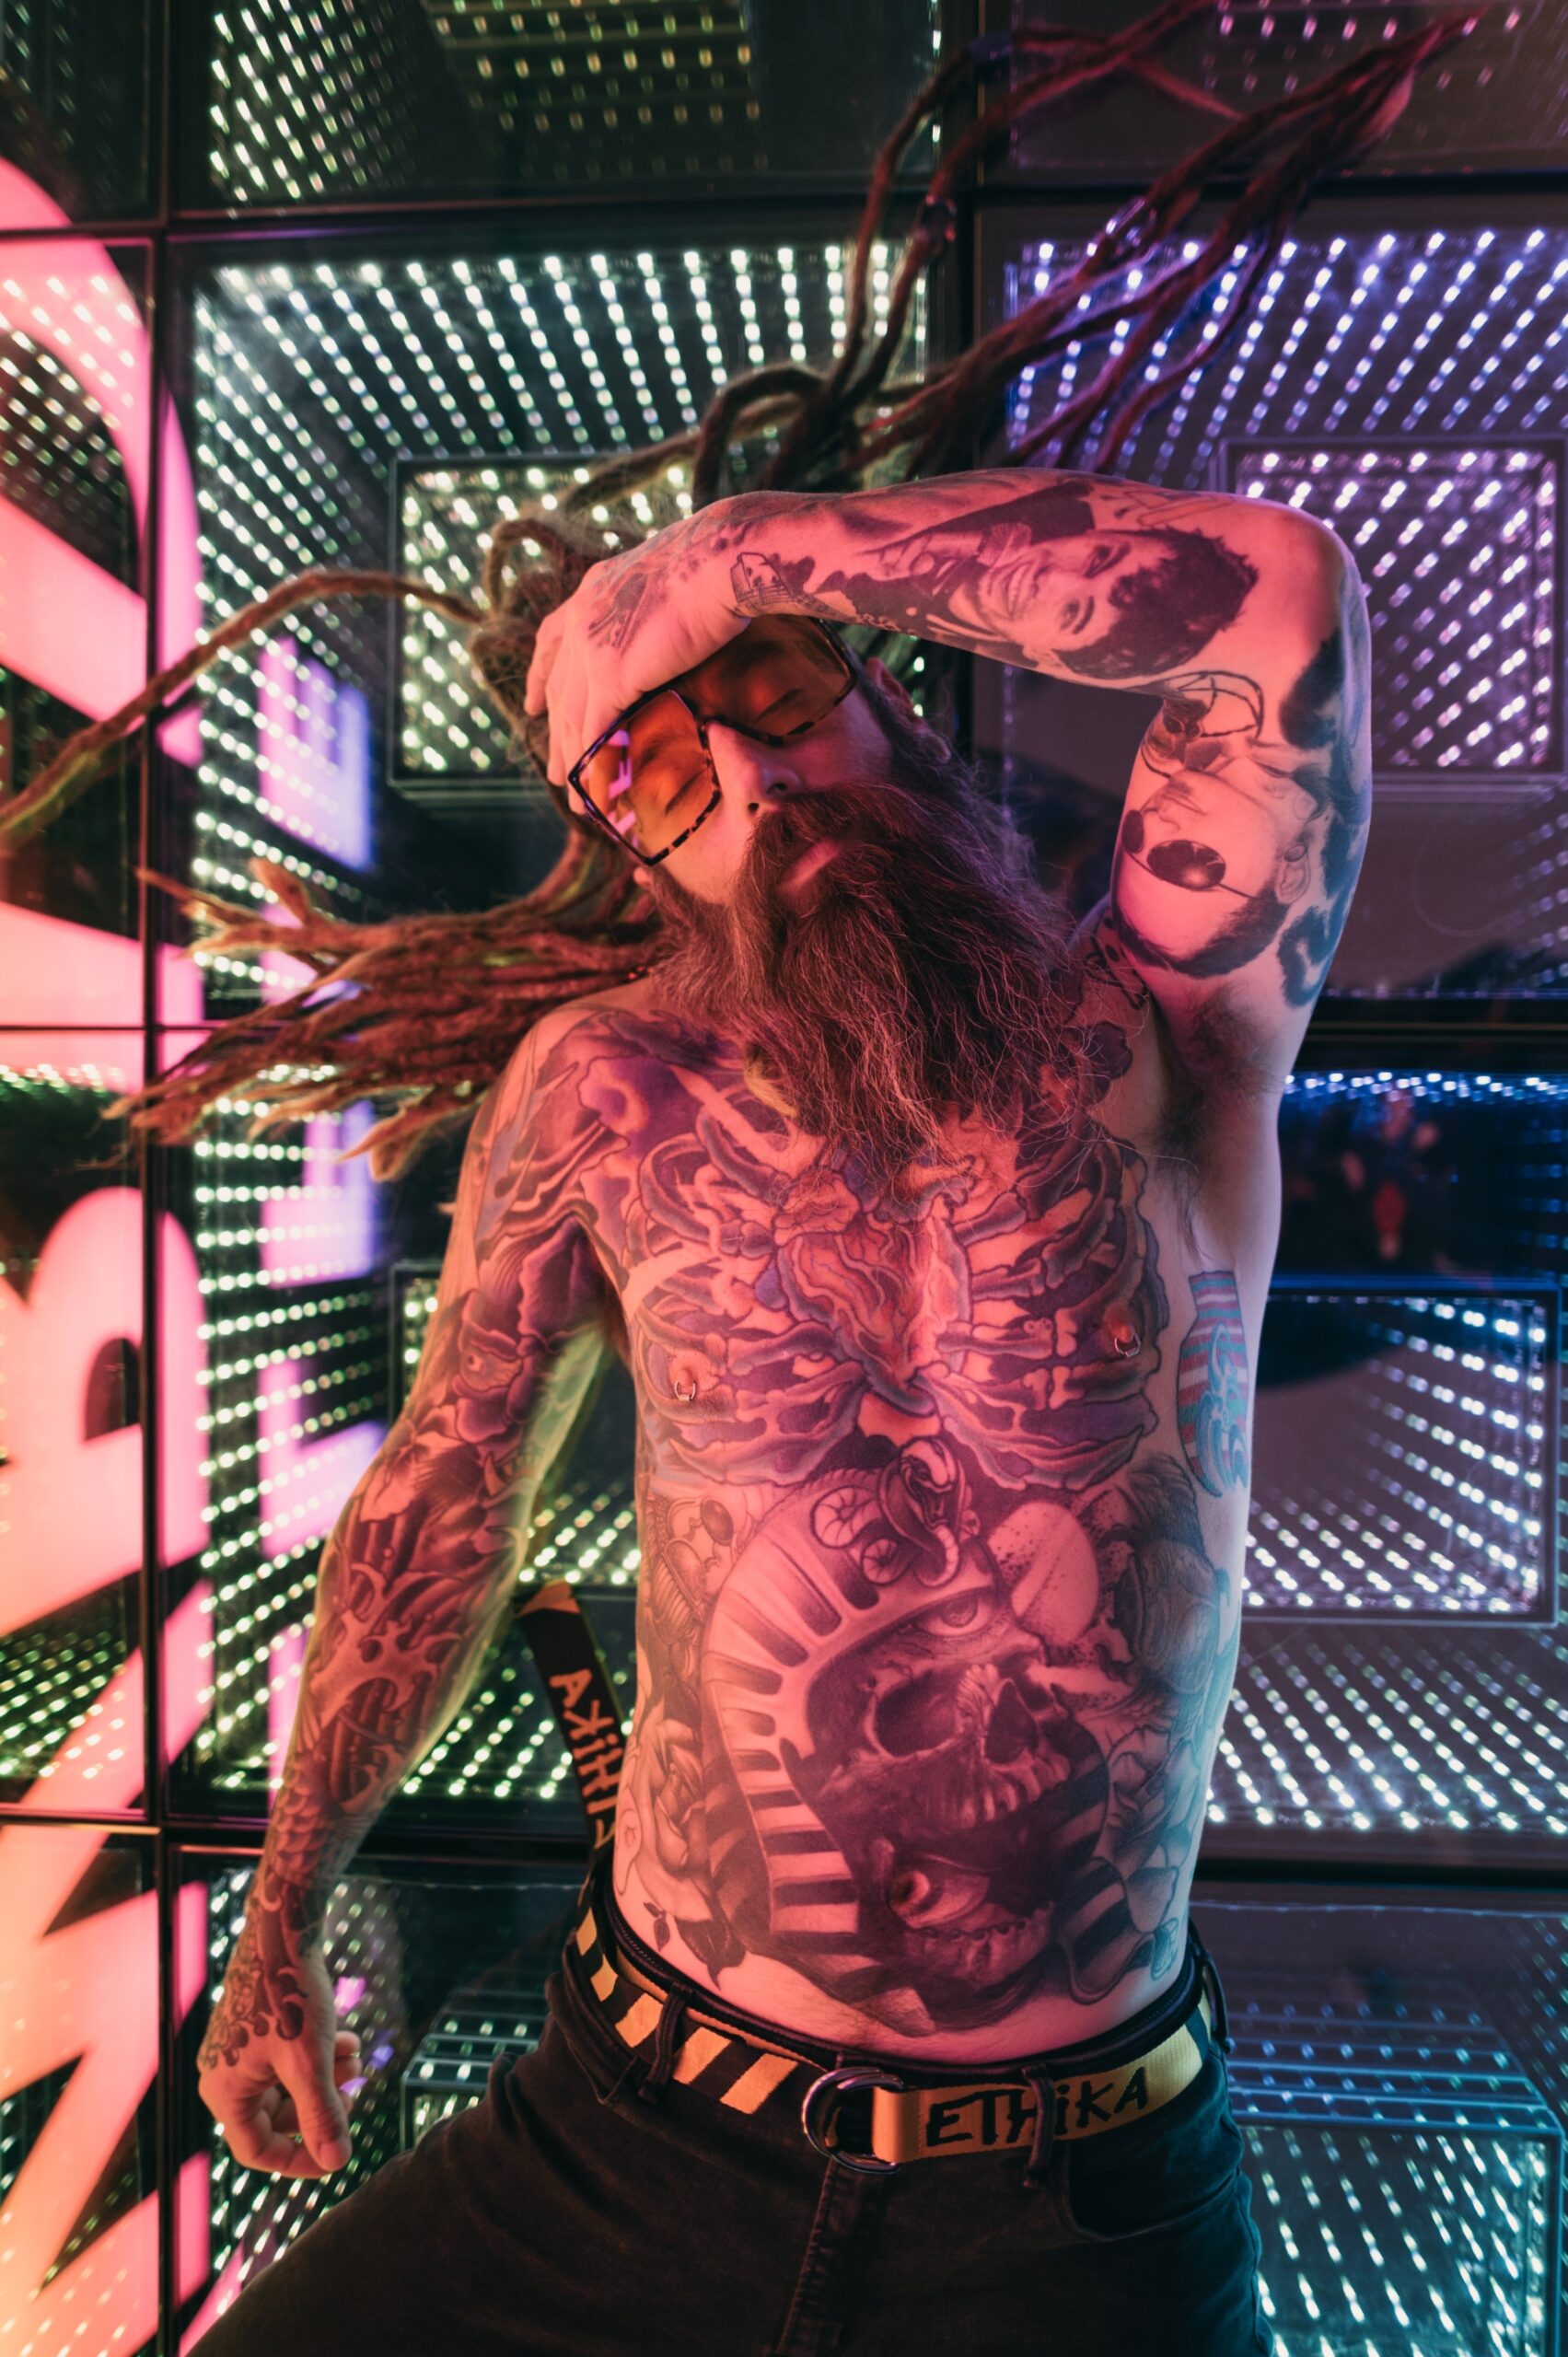 Shirtless tattooed man with dreadlocks, a beard, and sunglasses laying on glass floor with vibrant LED lights in it.